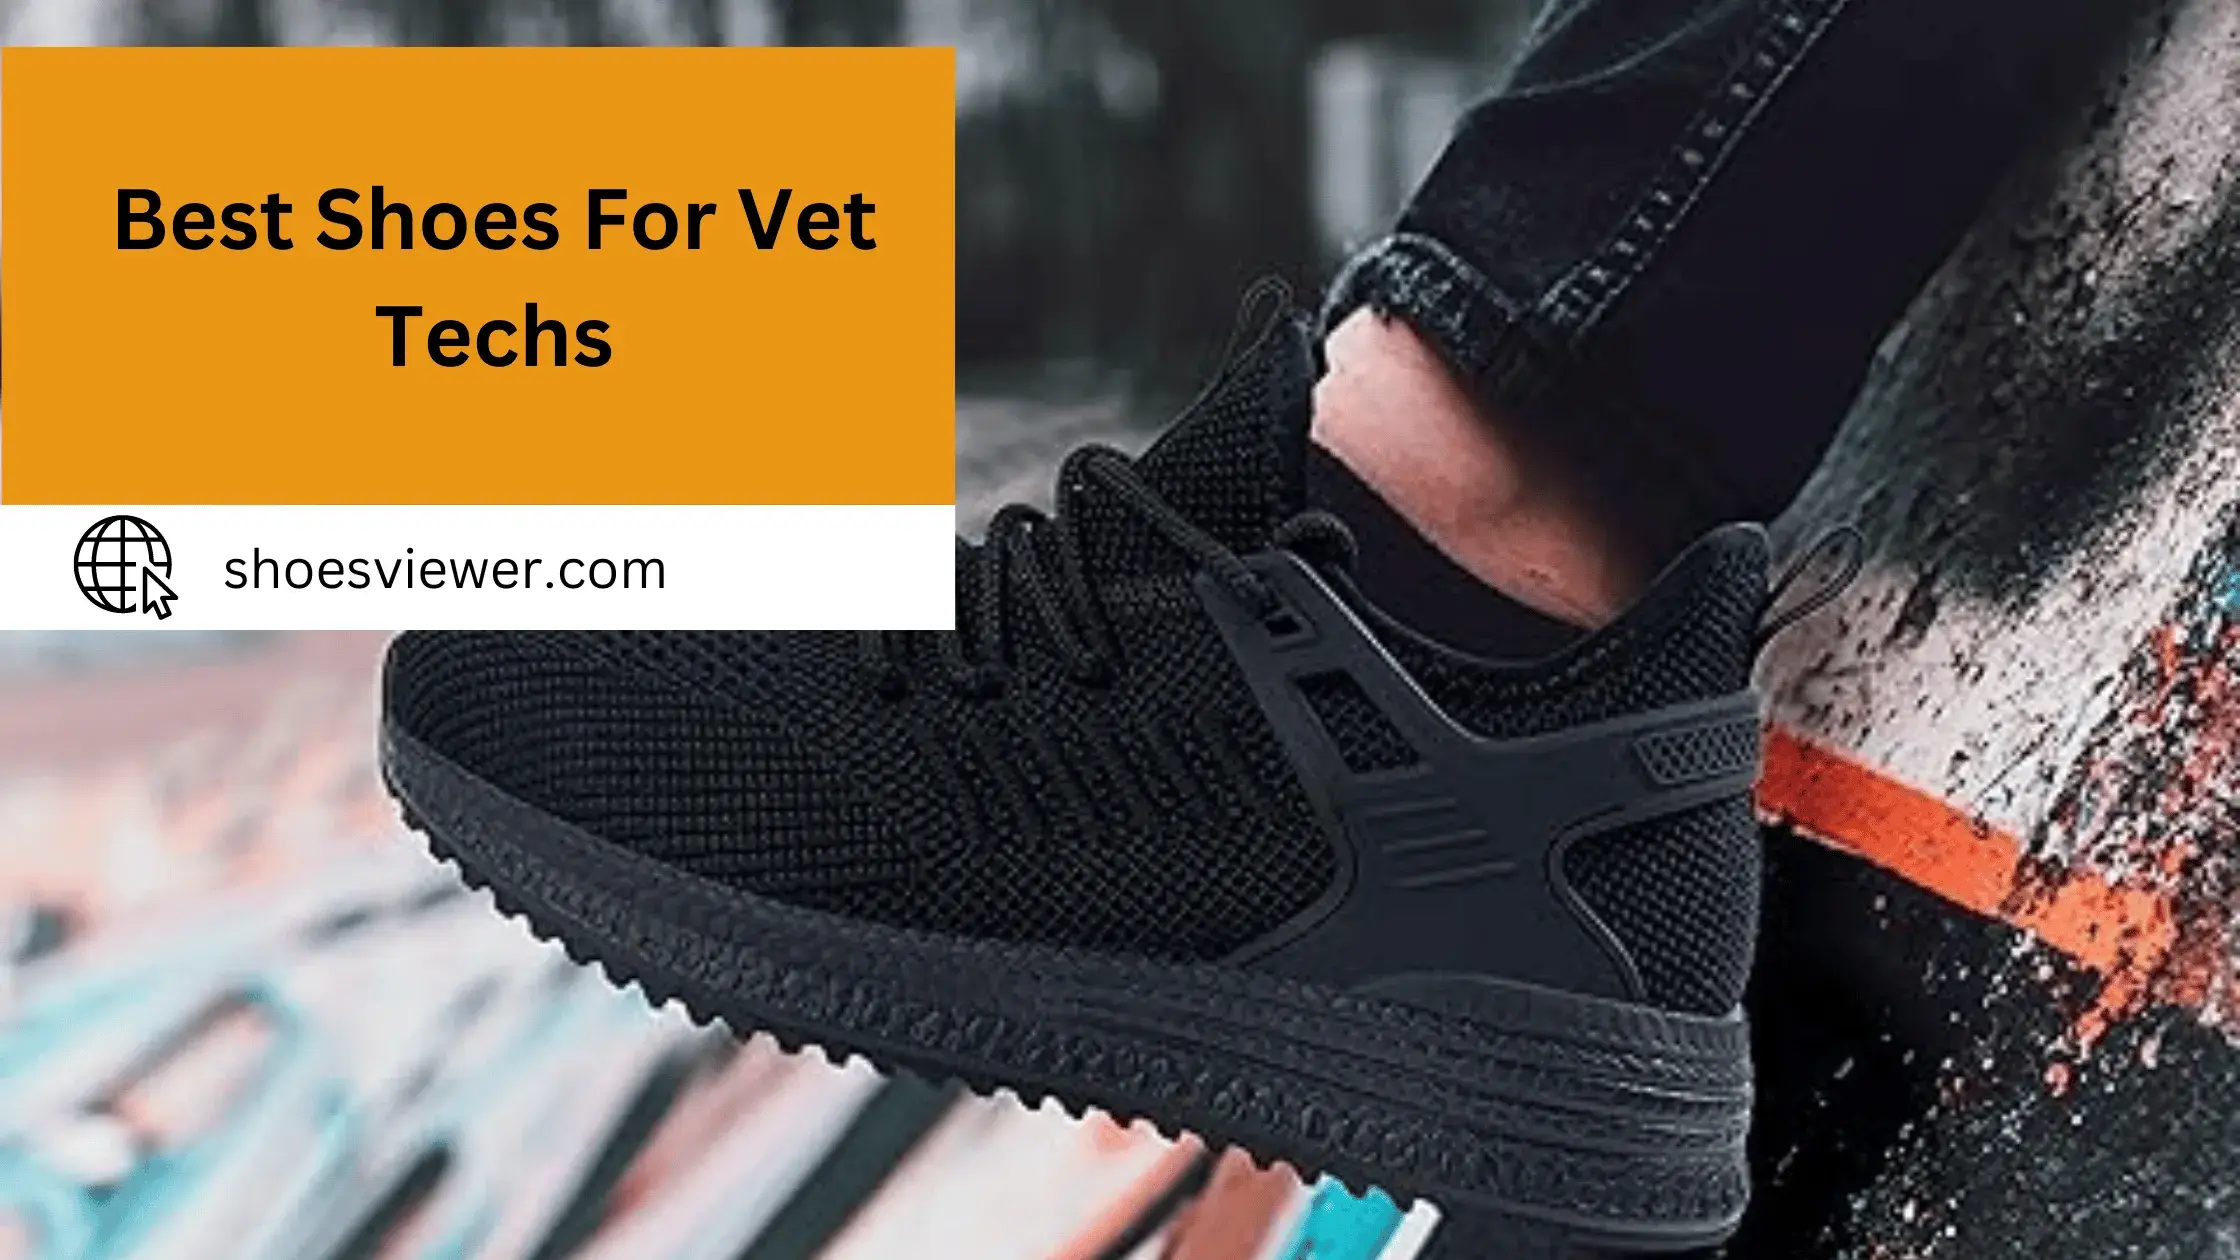 Best Shoes For Vet Techs - A Comprehensive Guide